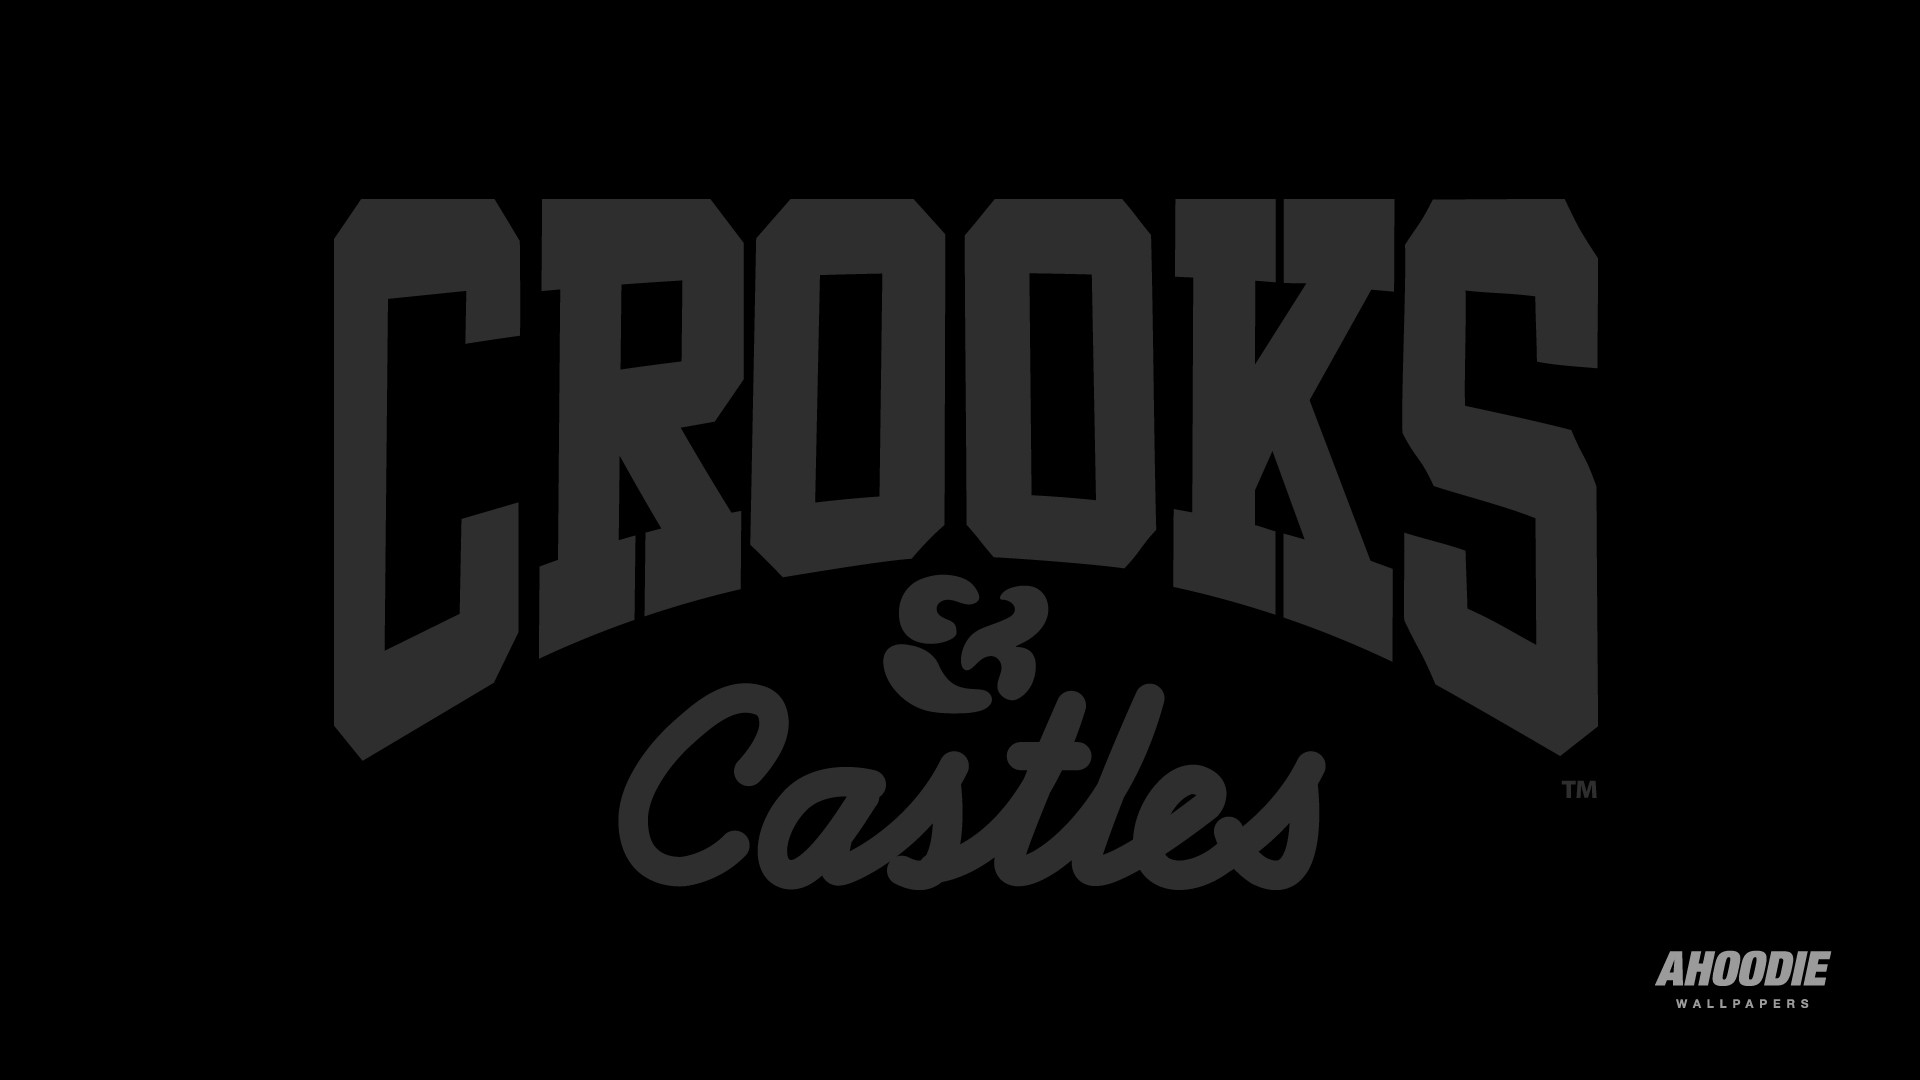 1920x1080 Crooks And Castles Wallpaper Crooks And Castles Iphone 5 Wallpaper